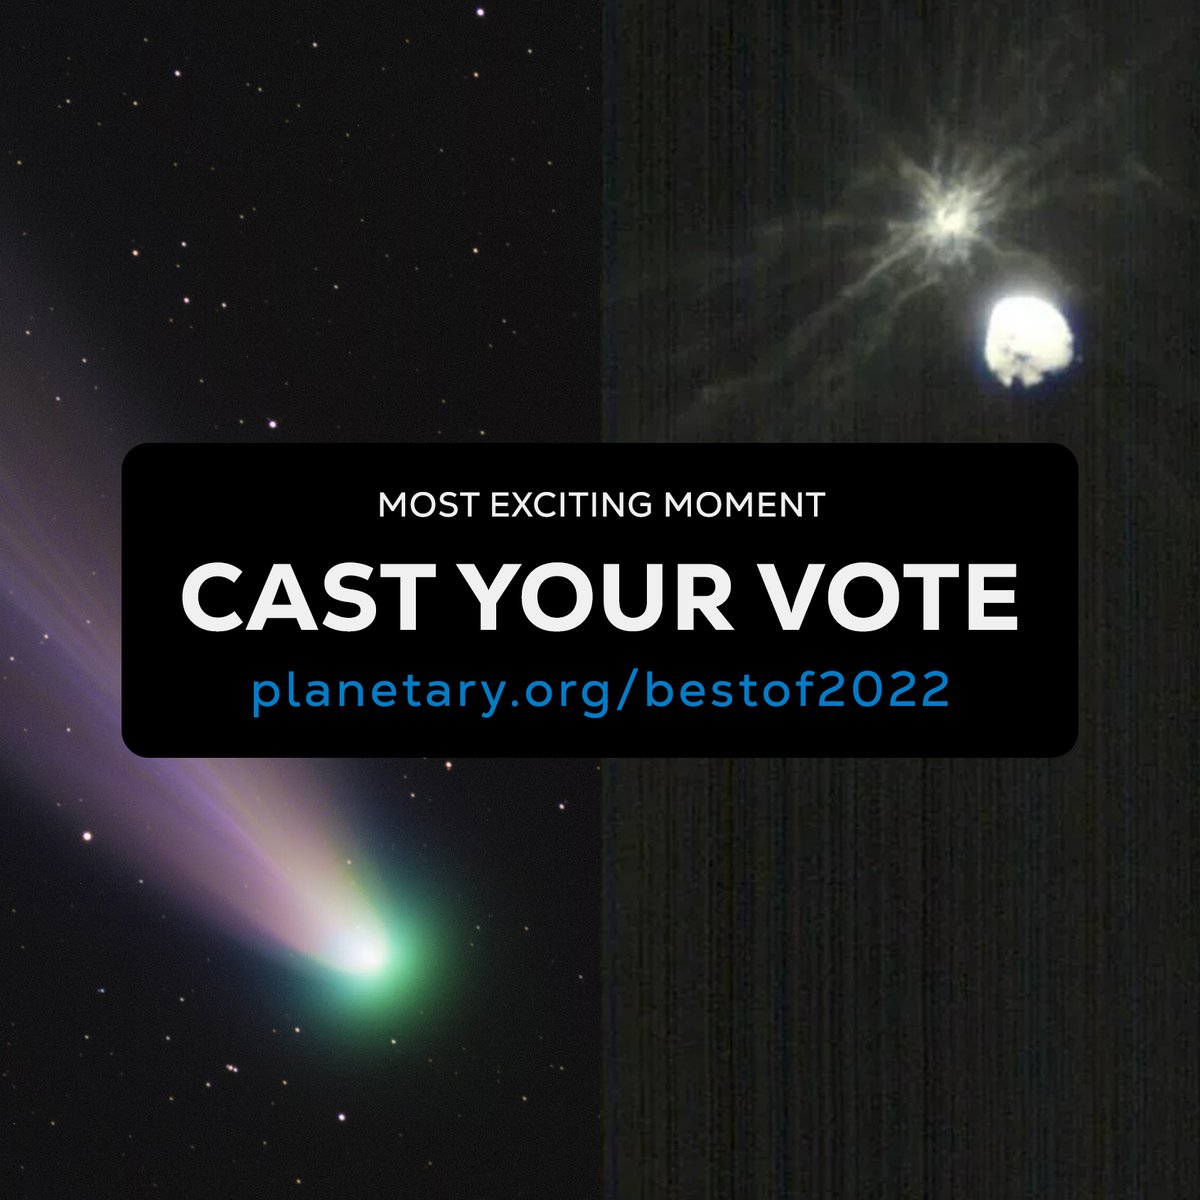 Remember how 2022 started off with a beautiful comet in the night skies? It may feel like you saw Comet Leonard a lifetime ago, but that's just because this year has been so jam-packed with space action! Vote for the most exciting moment and more at planetary.org/bestof2022.